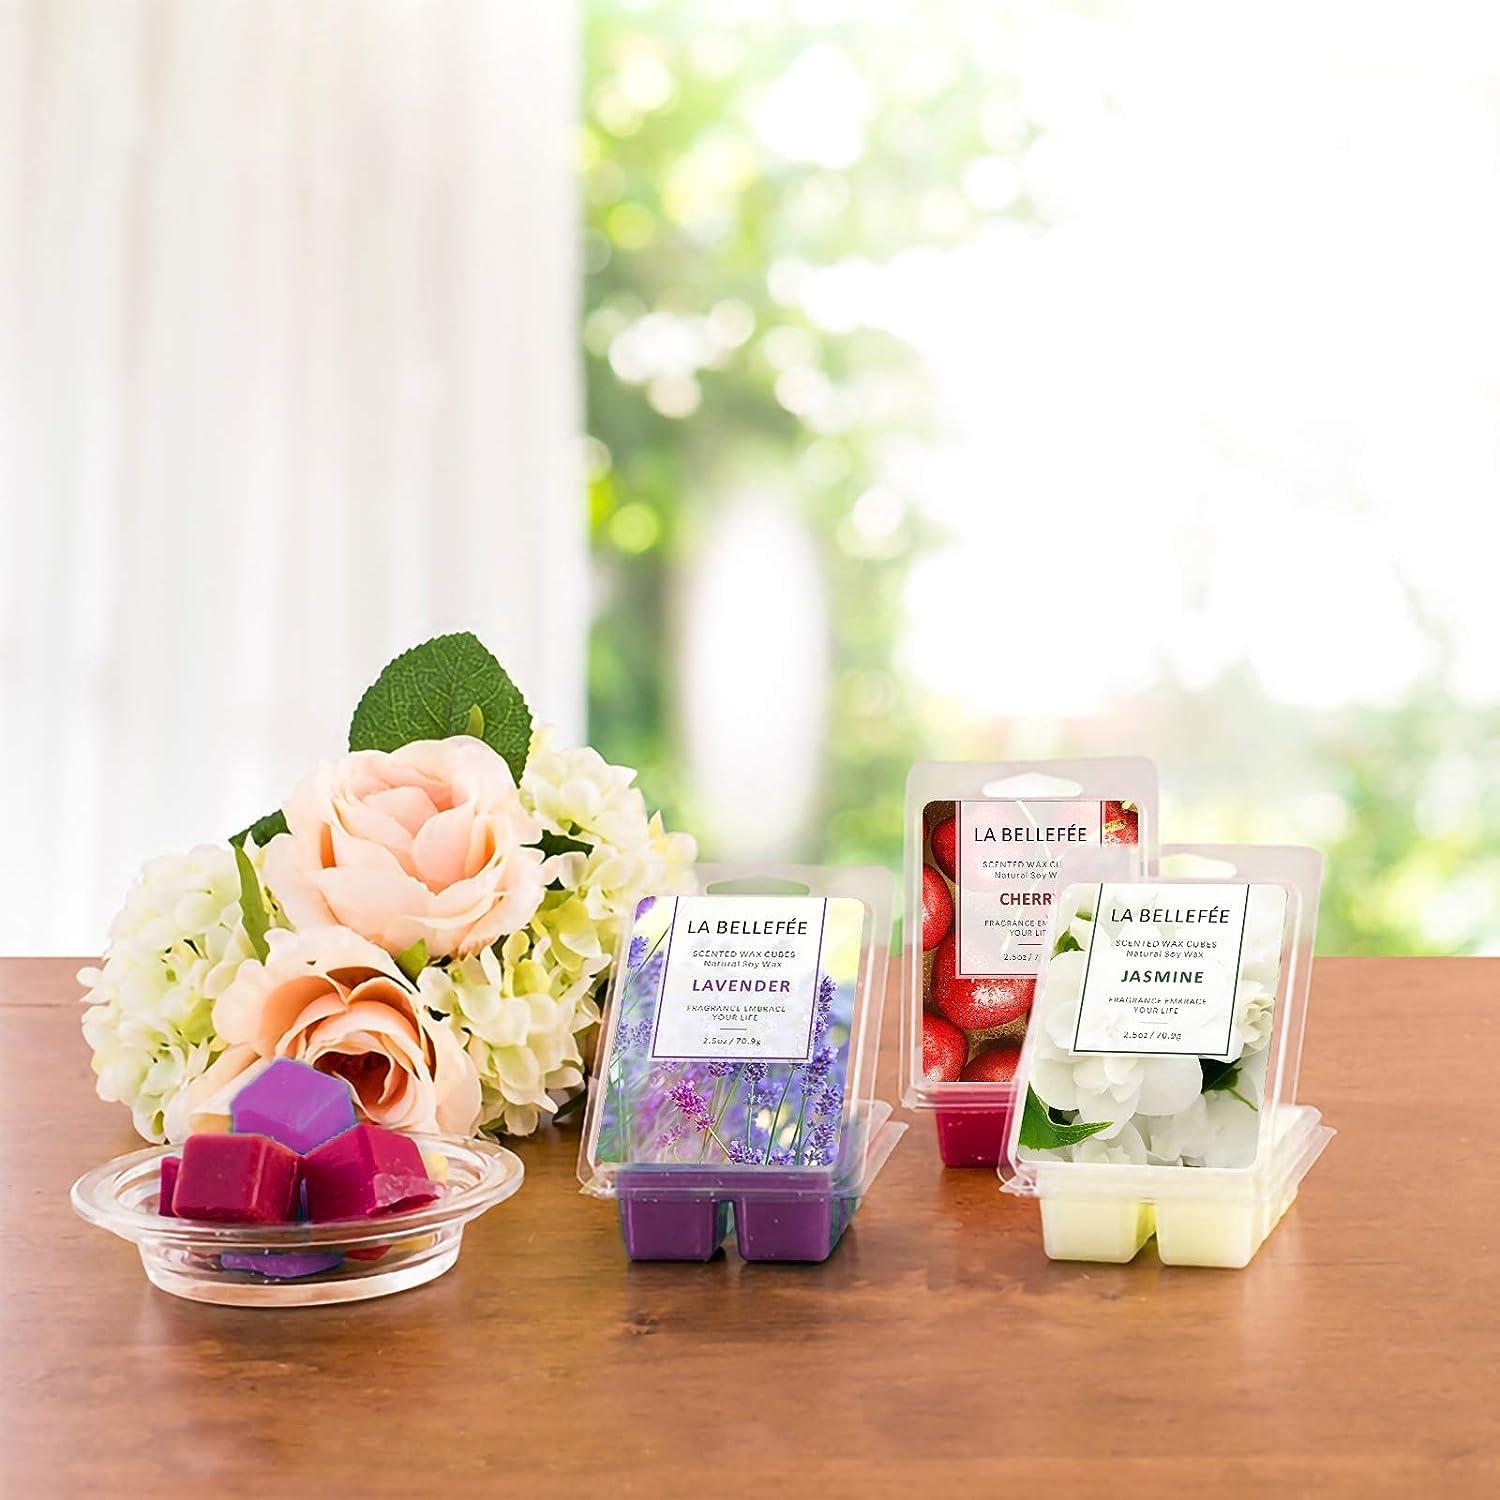 Wax Melts Wax Cubes, Scented Wax Melts, Scented Wax Cubes, Soy Wax Cubes for Warmers, Wax Melts Gift SetSoy Wax Cubes Candle Melts, Wax Bar Melts 2.5